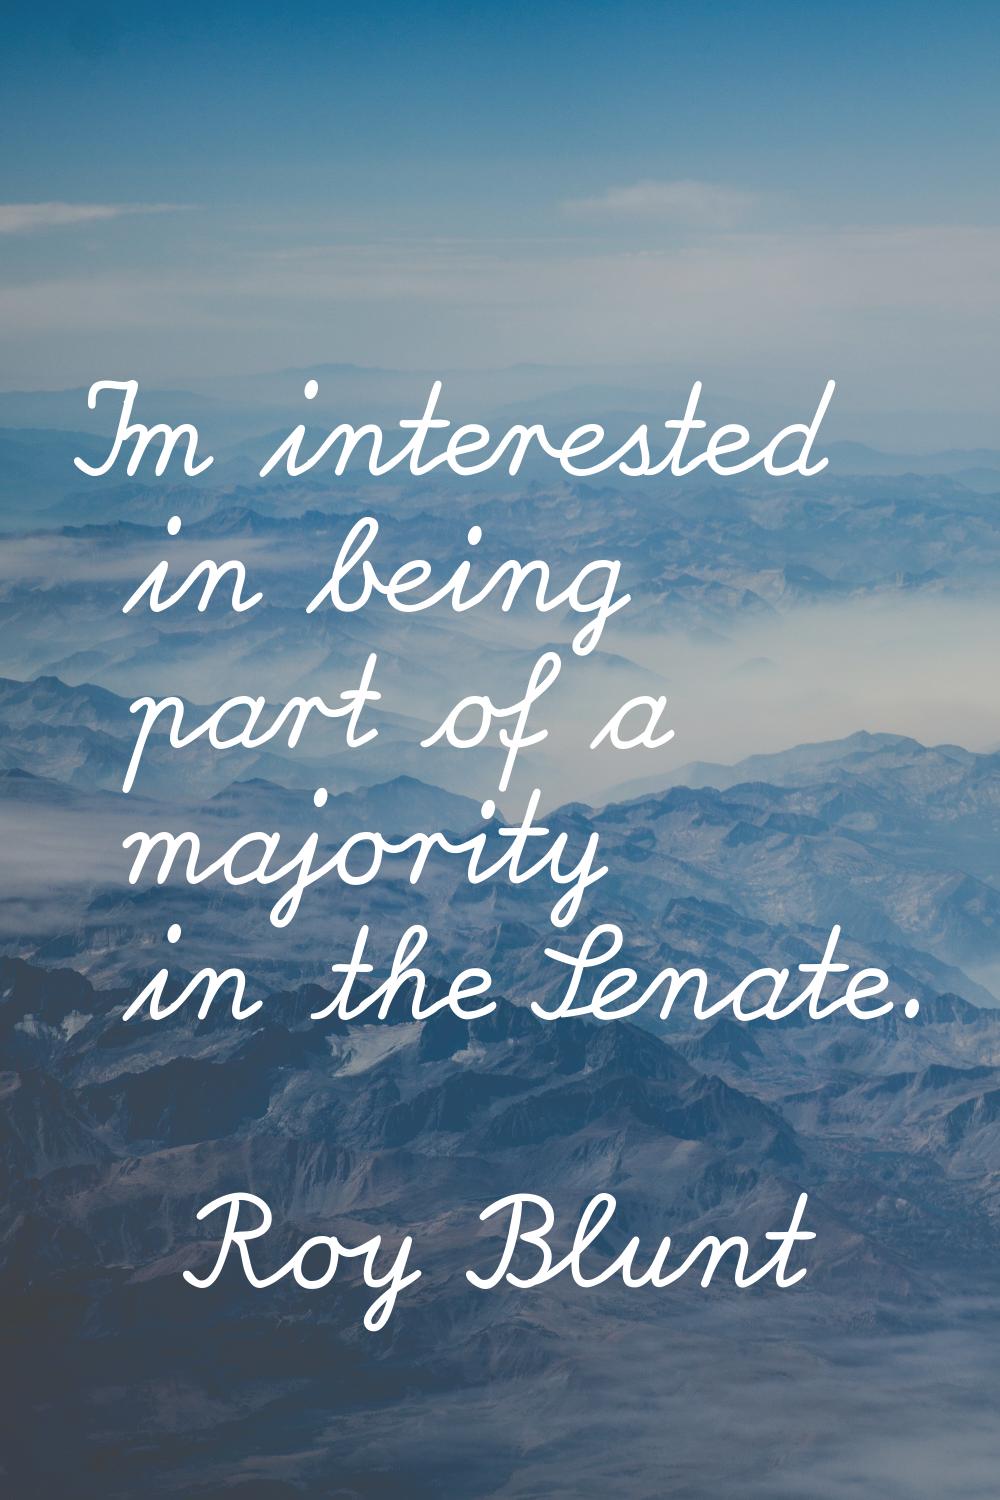 I'm interested in being part of a majority in the Senate.